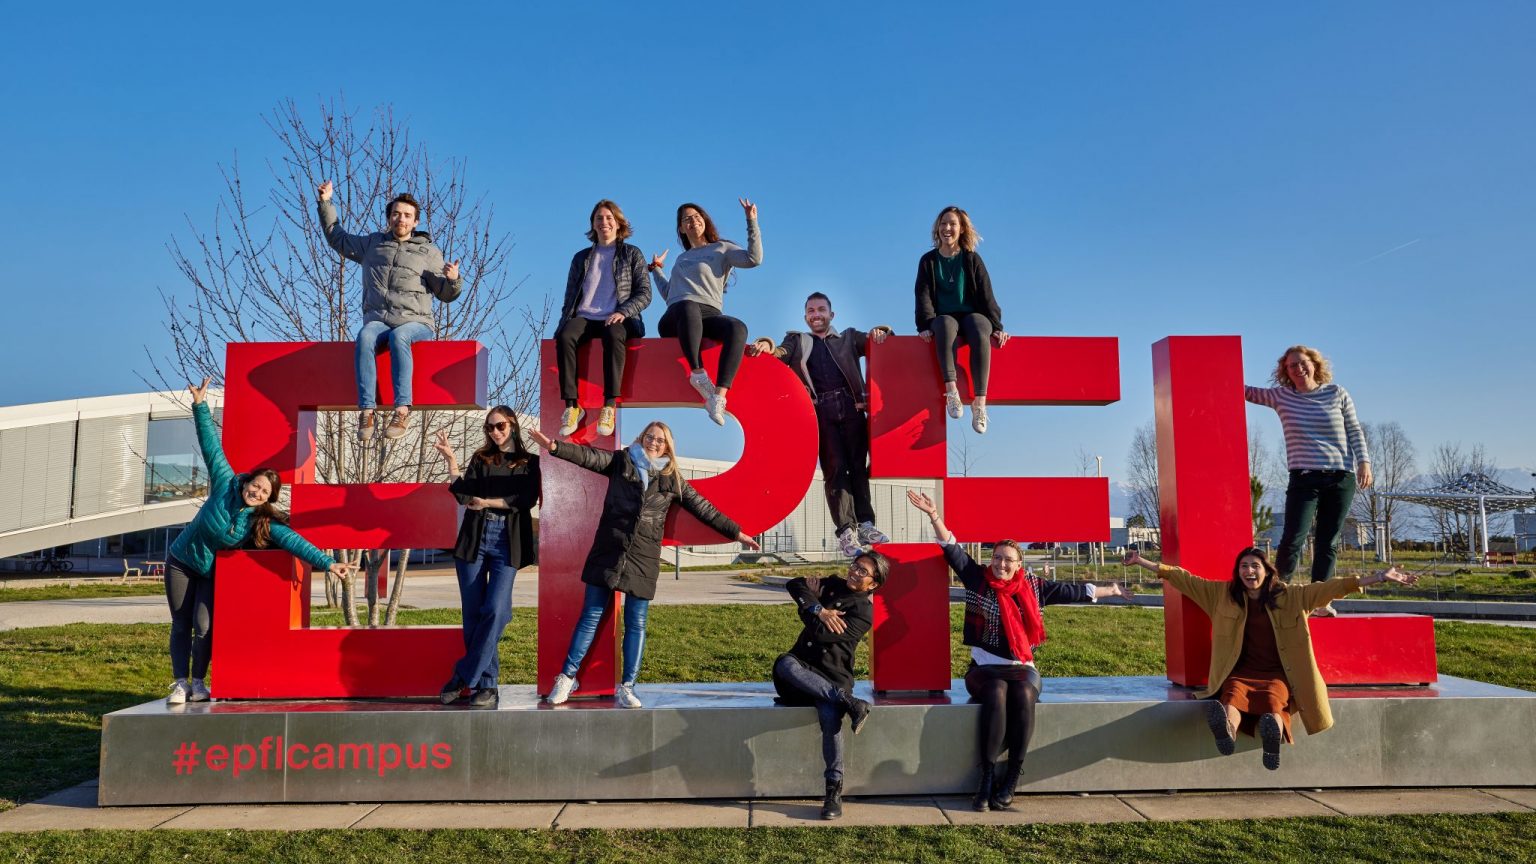 12 LCE staff members standing on a large red EPFL statue outdoors, posing in silly poses